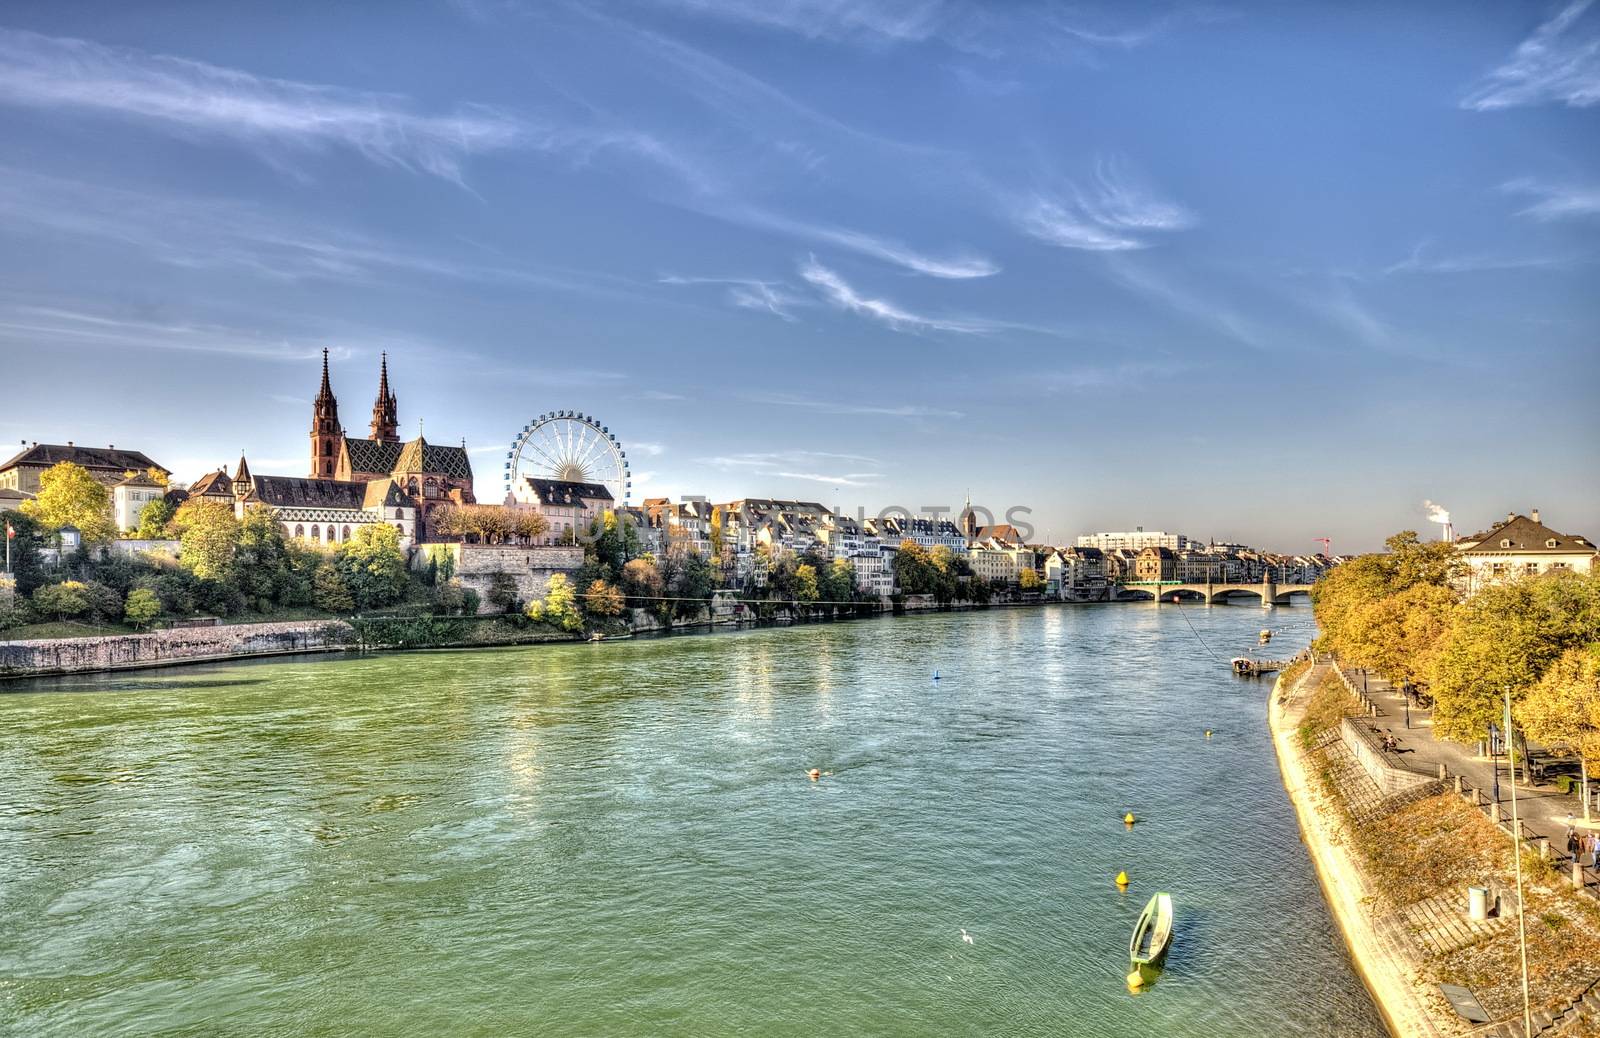 City of Basel in Switzerland by anderm